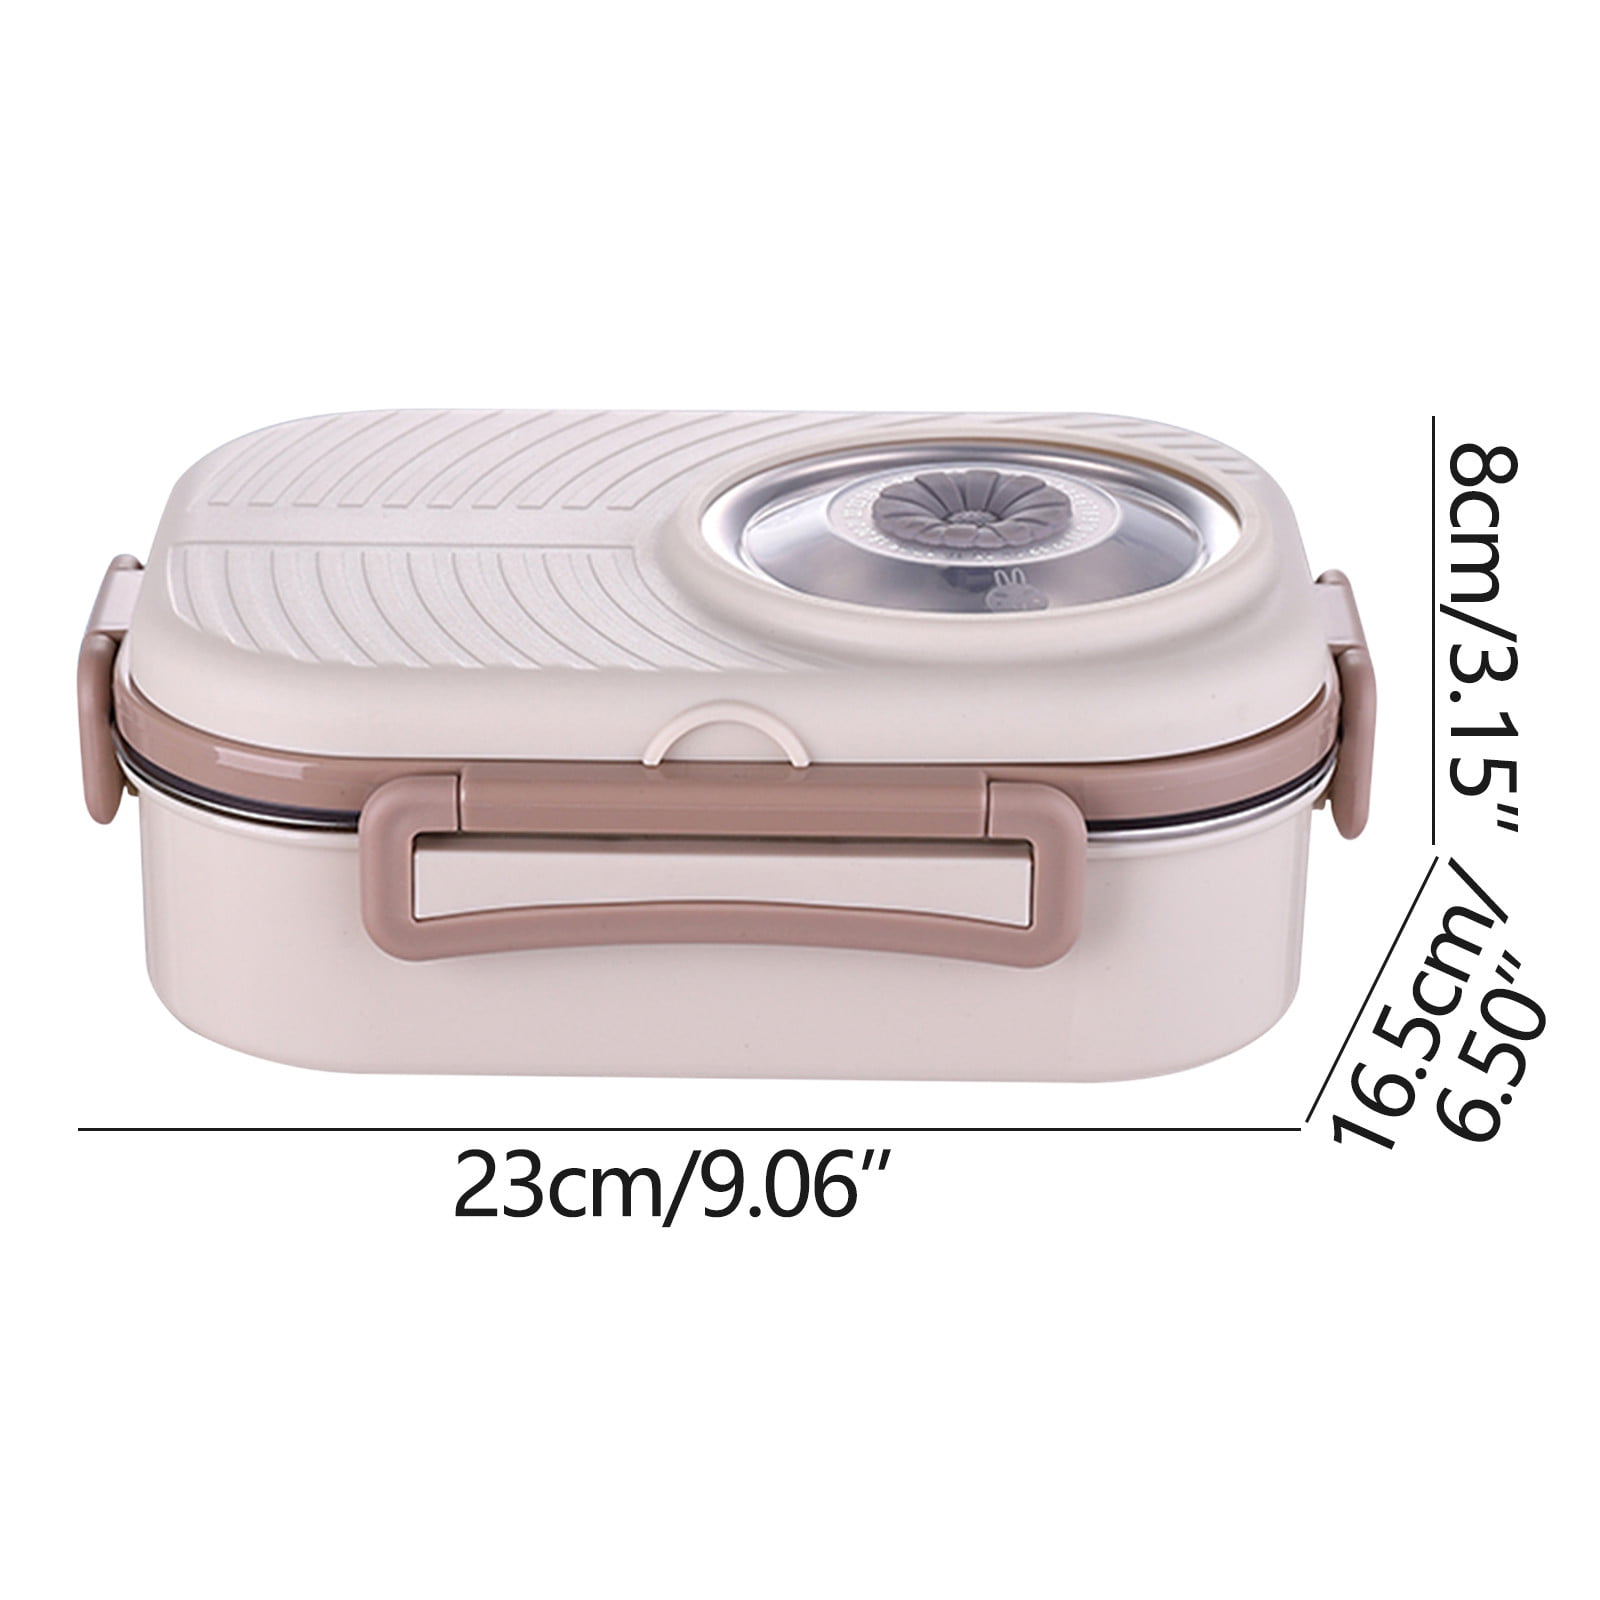 Portable 304 Stainless Steel Bento Box with 3 Compartments Lunch Box  Leakproof Microwave Heating Food Container Tableware Adults - Price history  & Review, AliExpress Seller - Lightdot Store